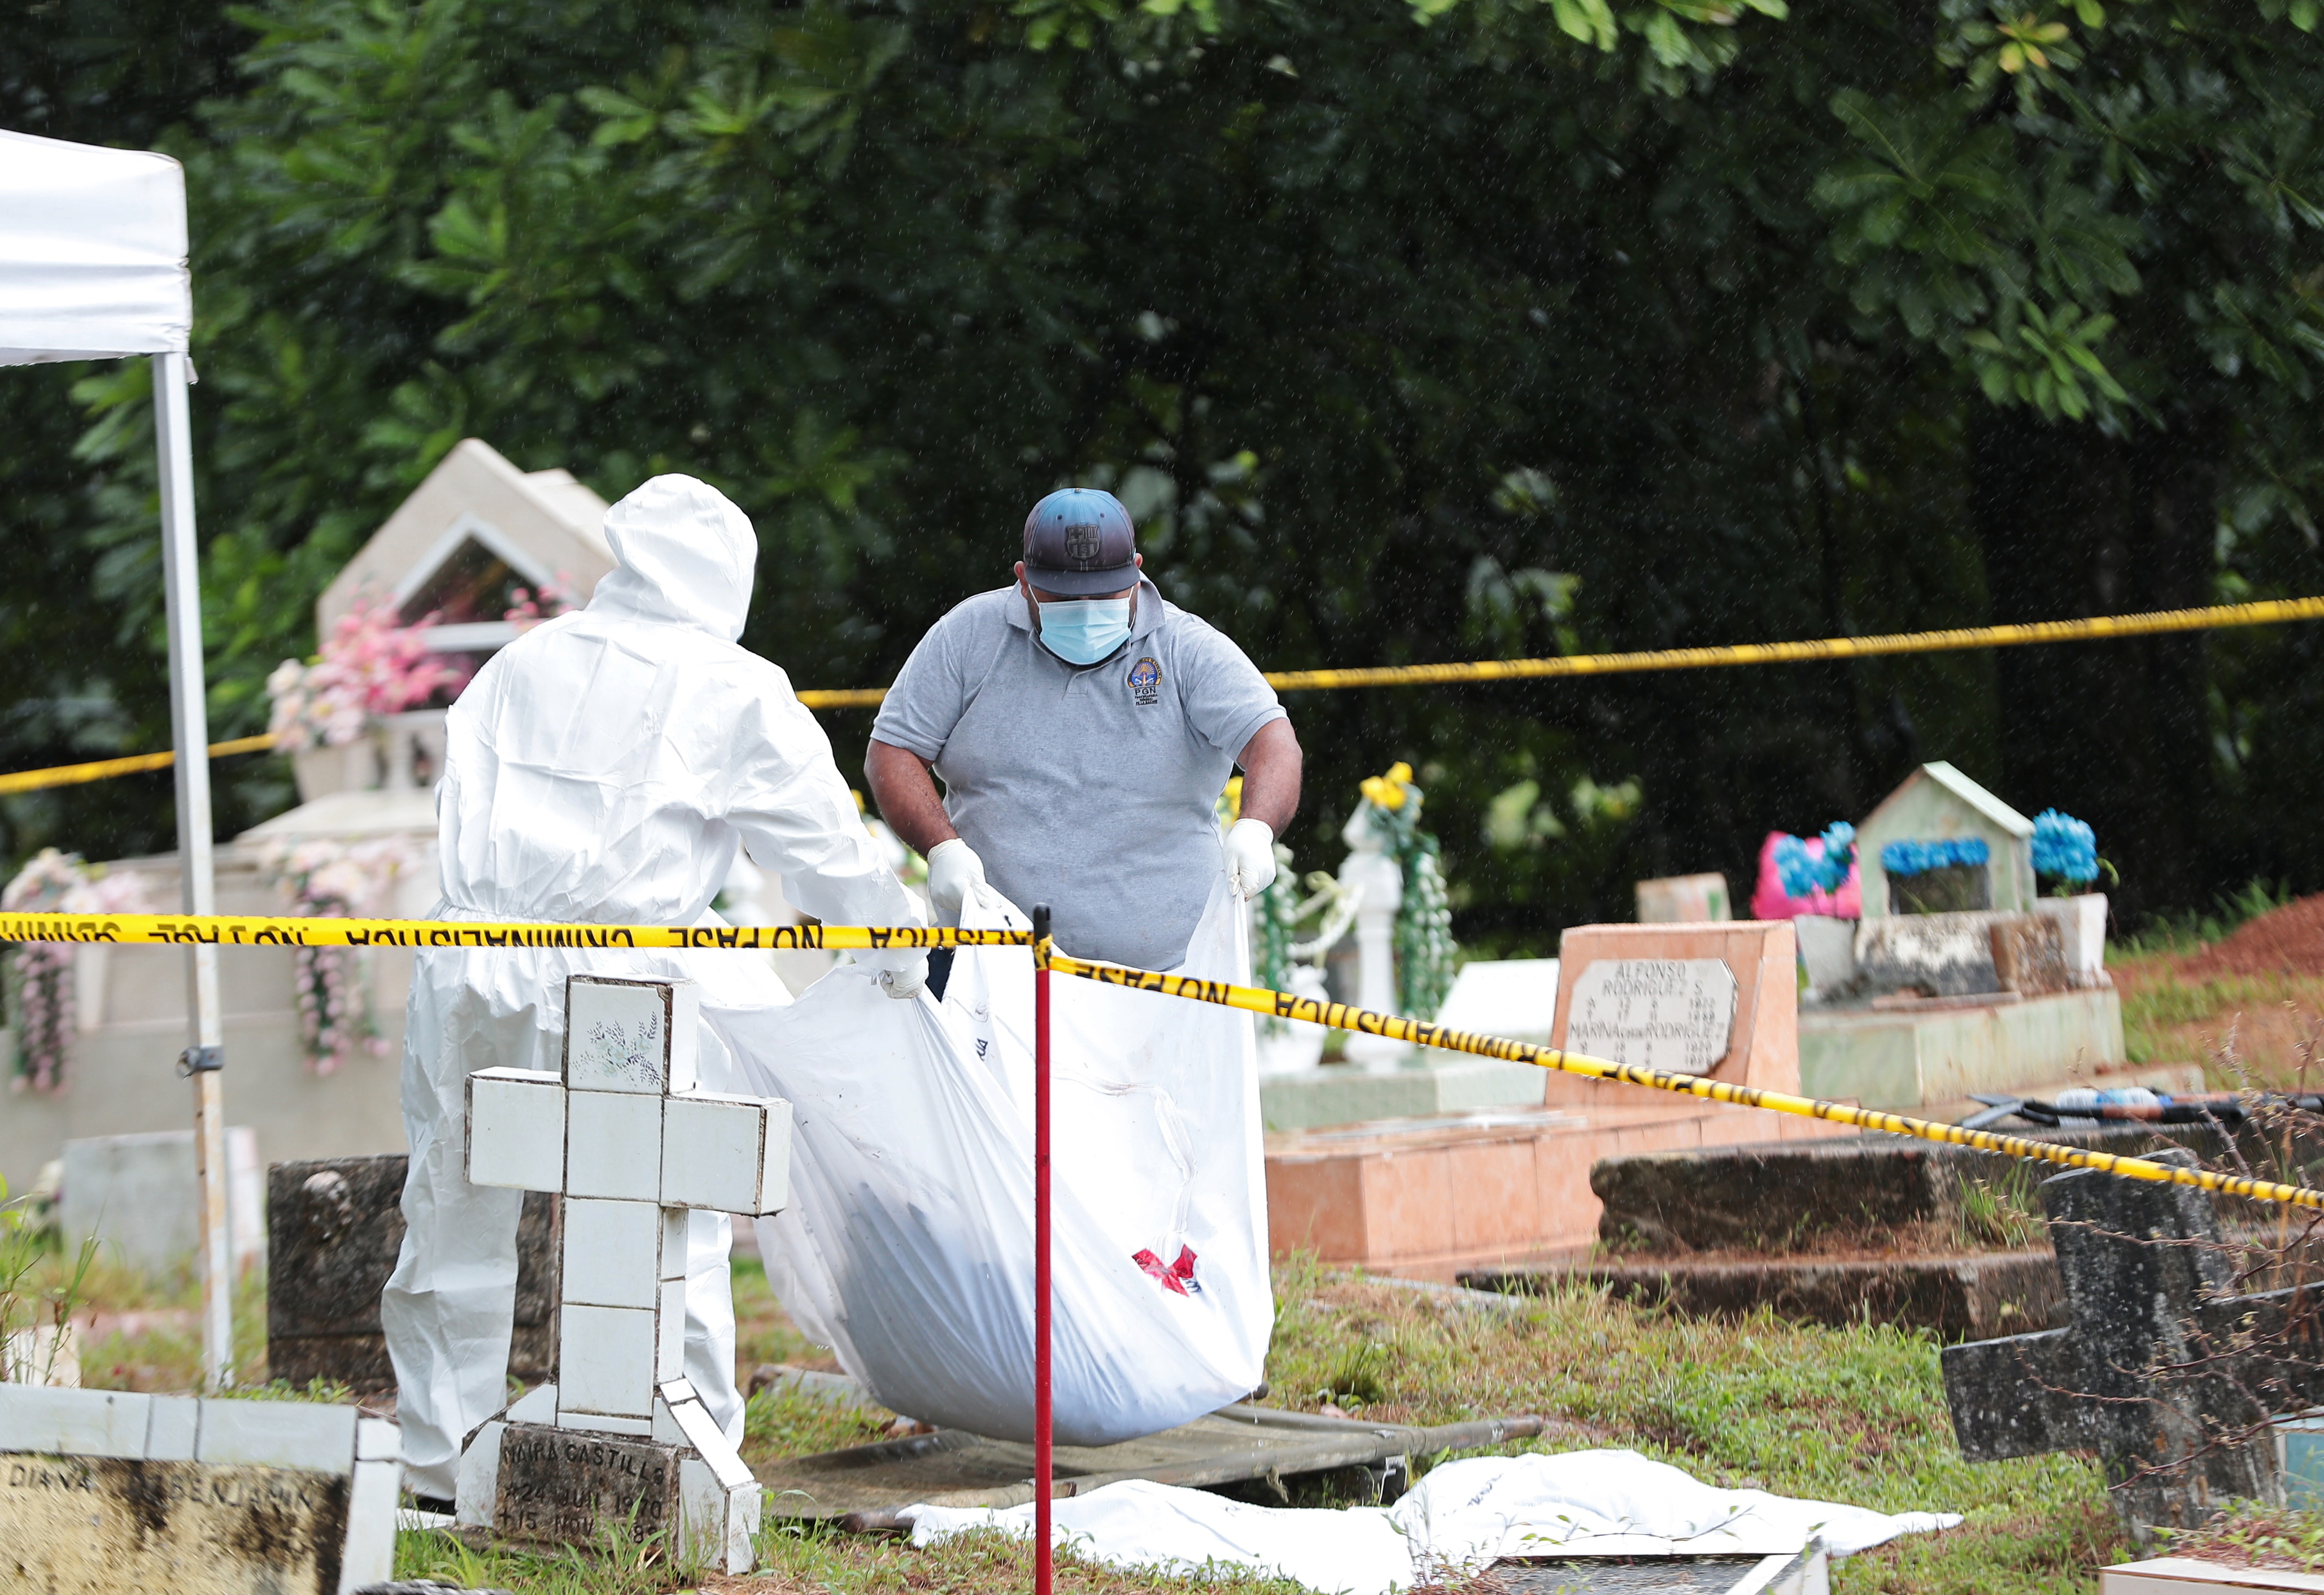 Members of a forensic team work on the exhumation of the remains of victims of the 1989 U.S. invasion, in Colon